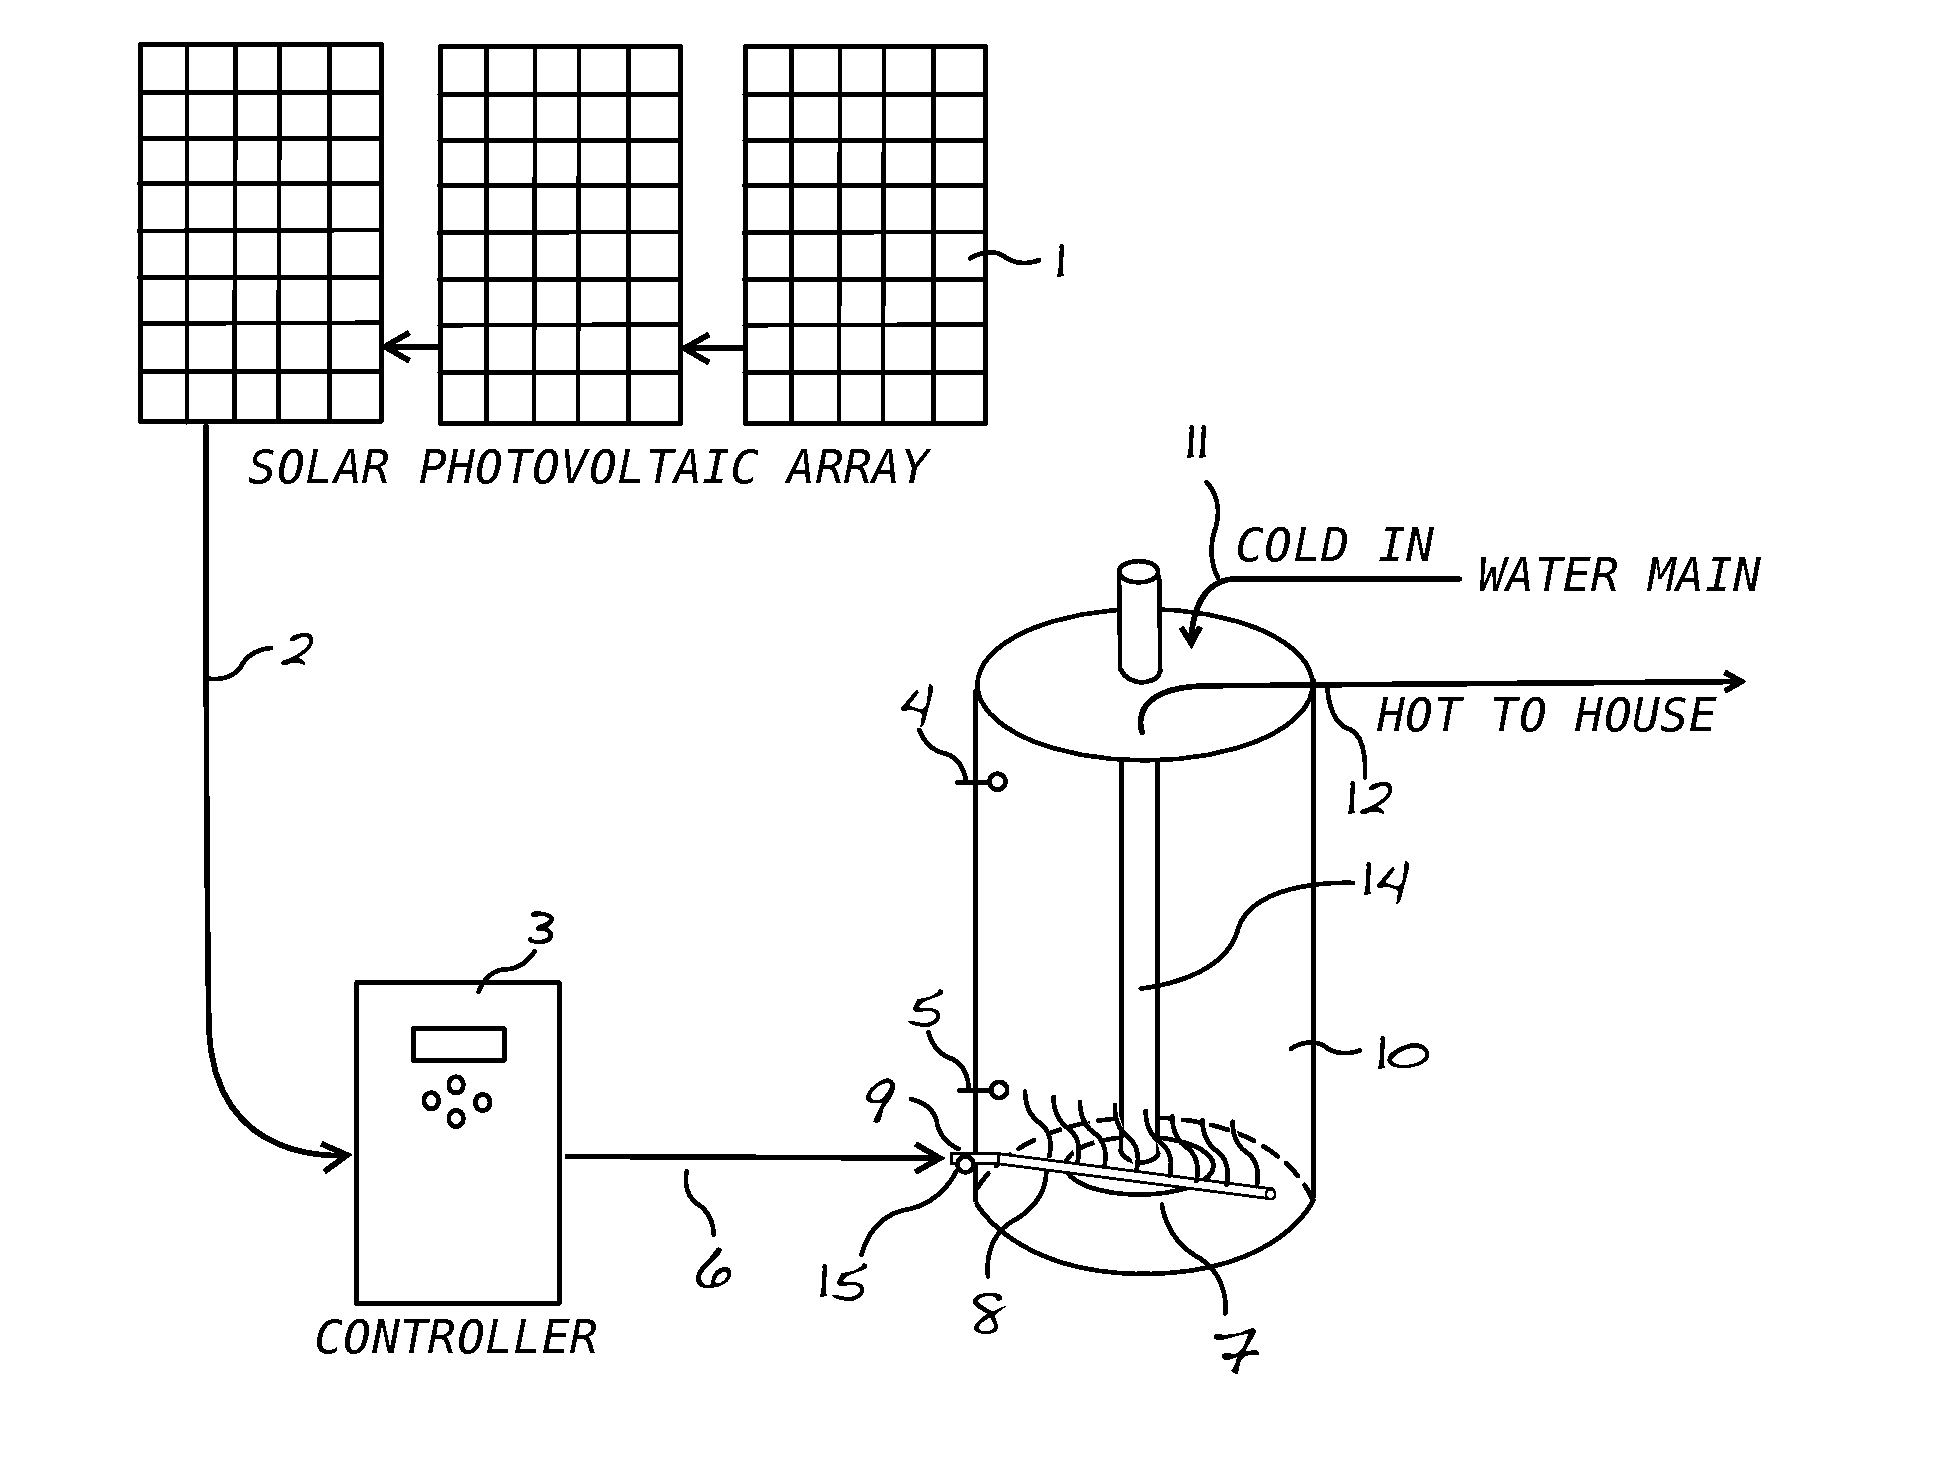 Solar Photovoltaic Water Heating System Utilizing Microprocessor Control and Water Heater Retrofit Adaptor